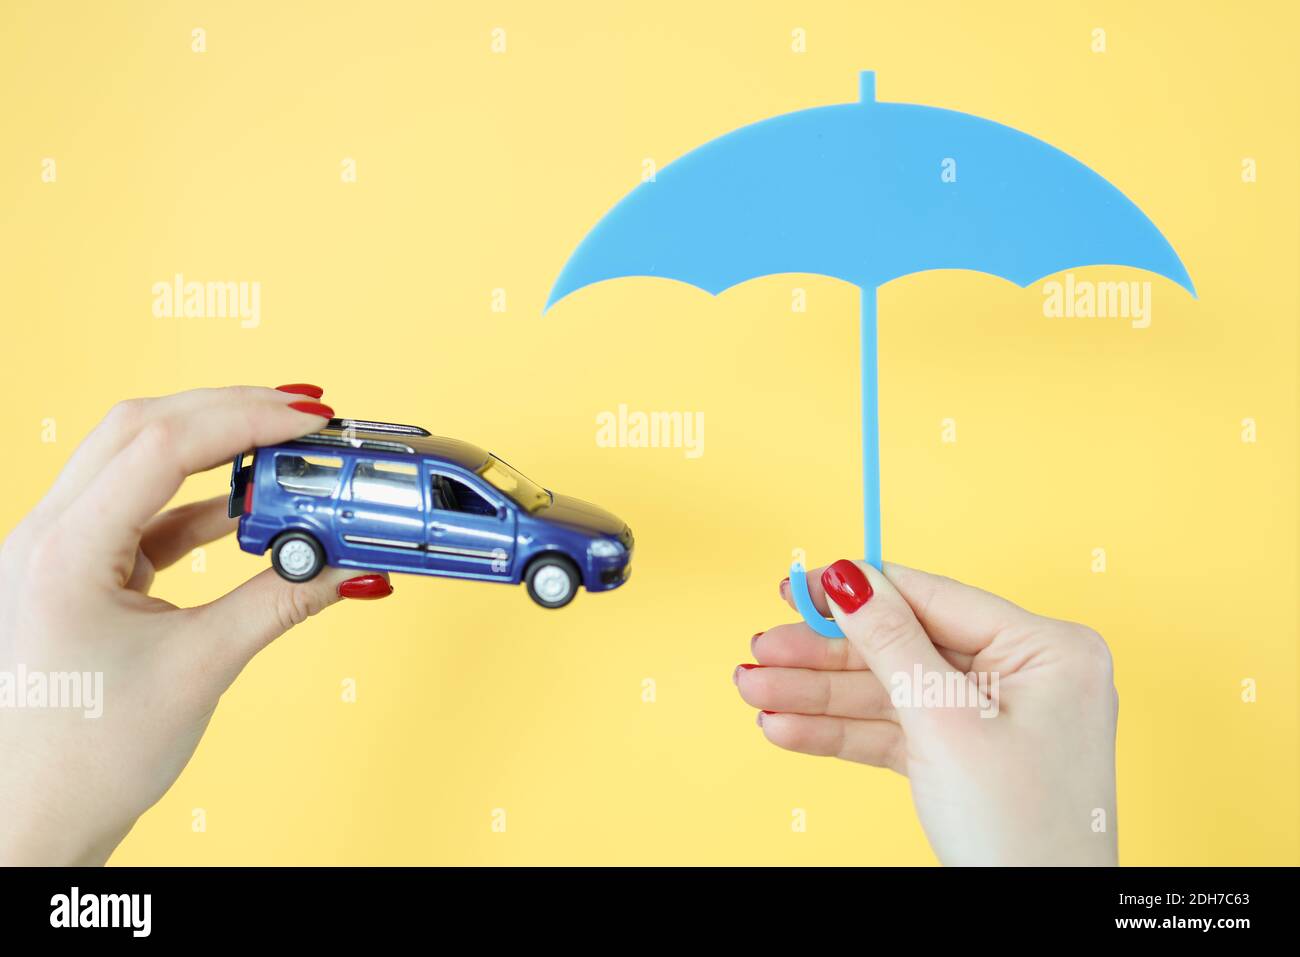 They are holding a car and an umbrella. Stock Photo